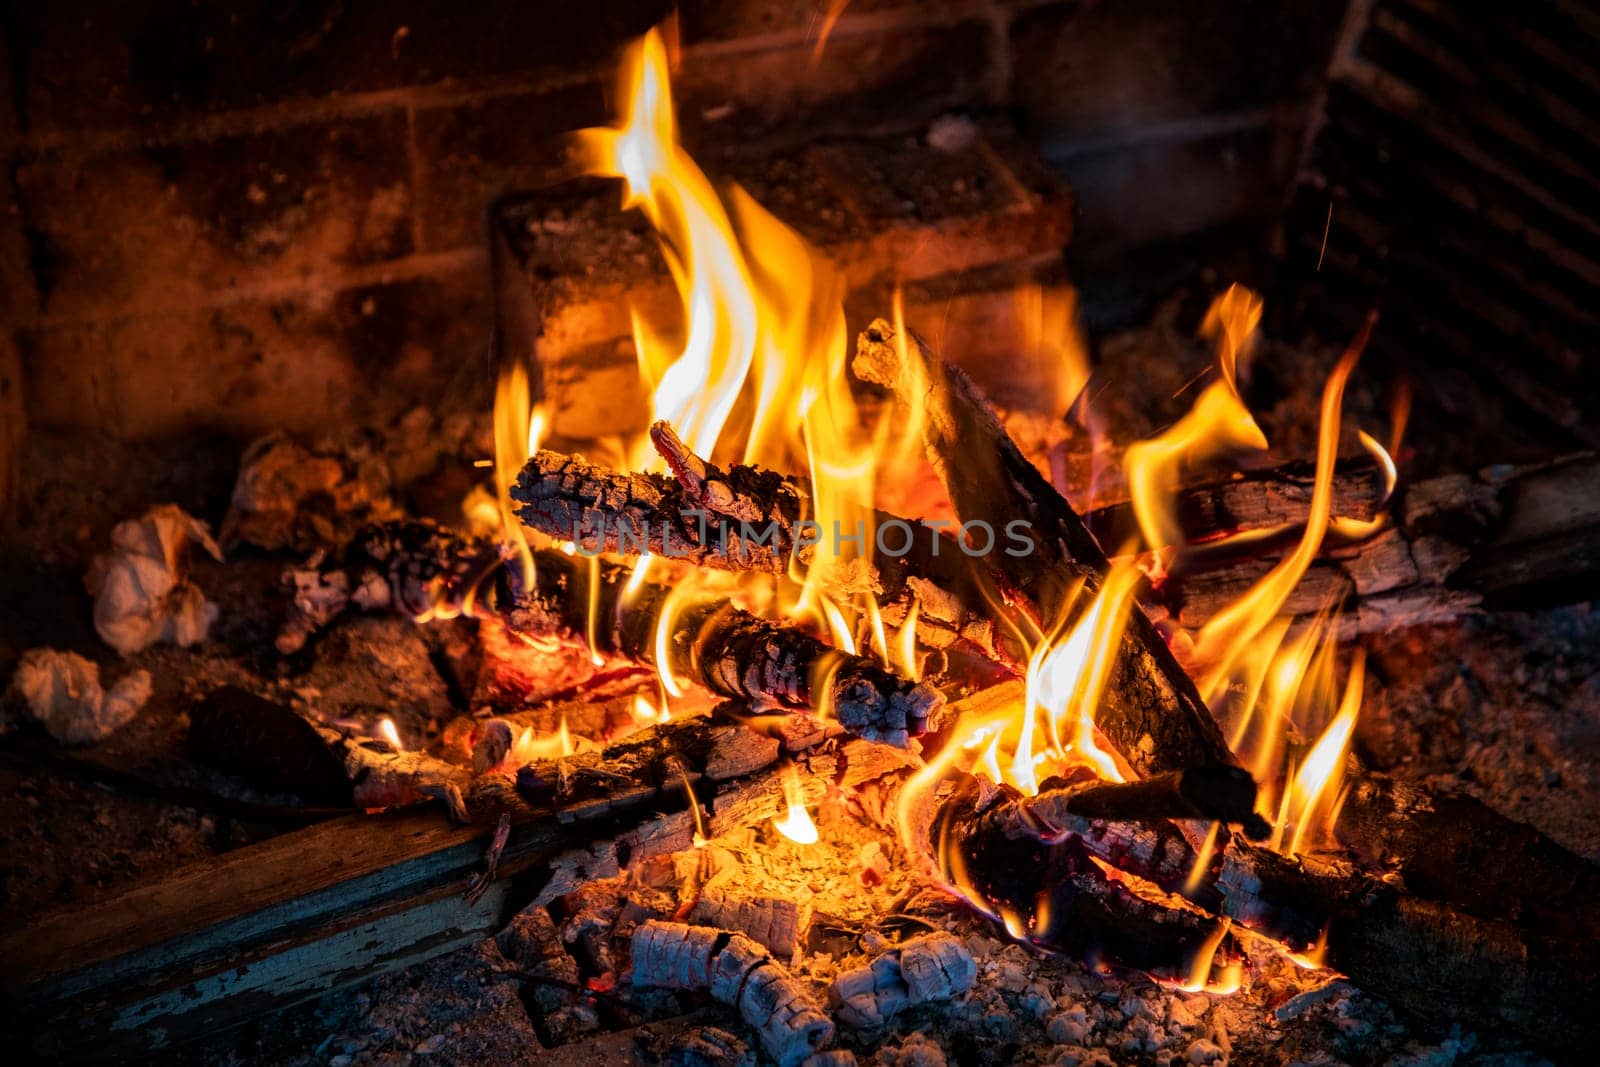 Burning firewood in a fireplace, vivid burning orange and yellow flames.